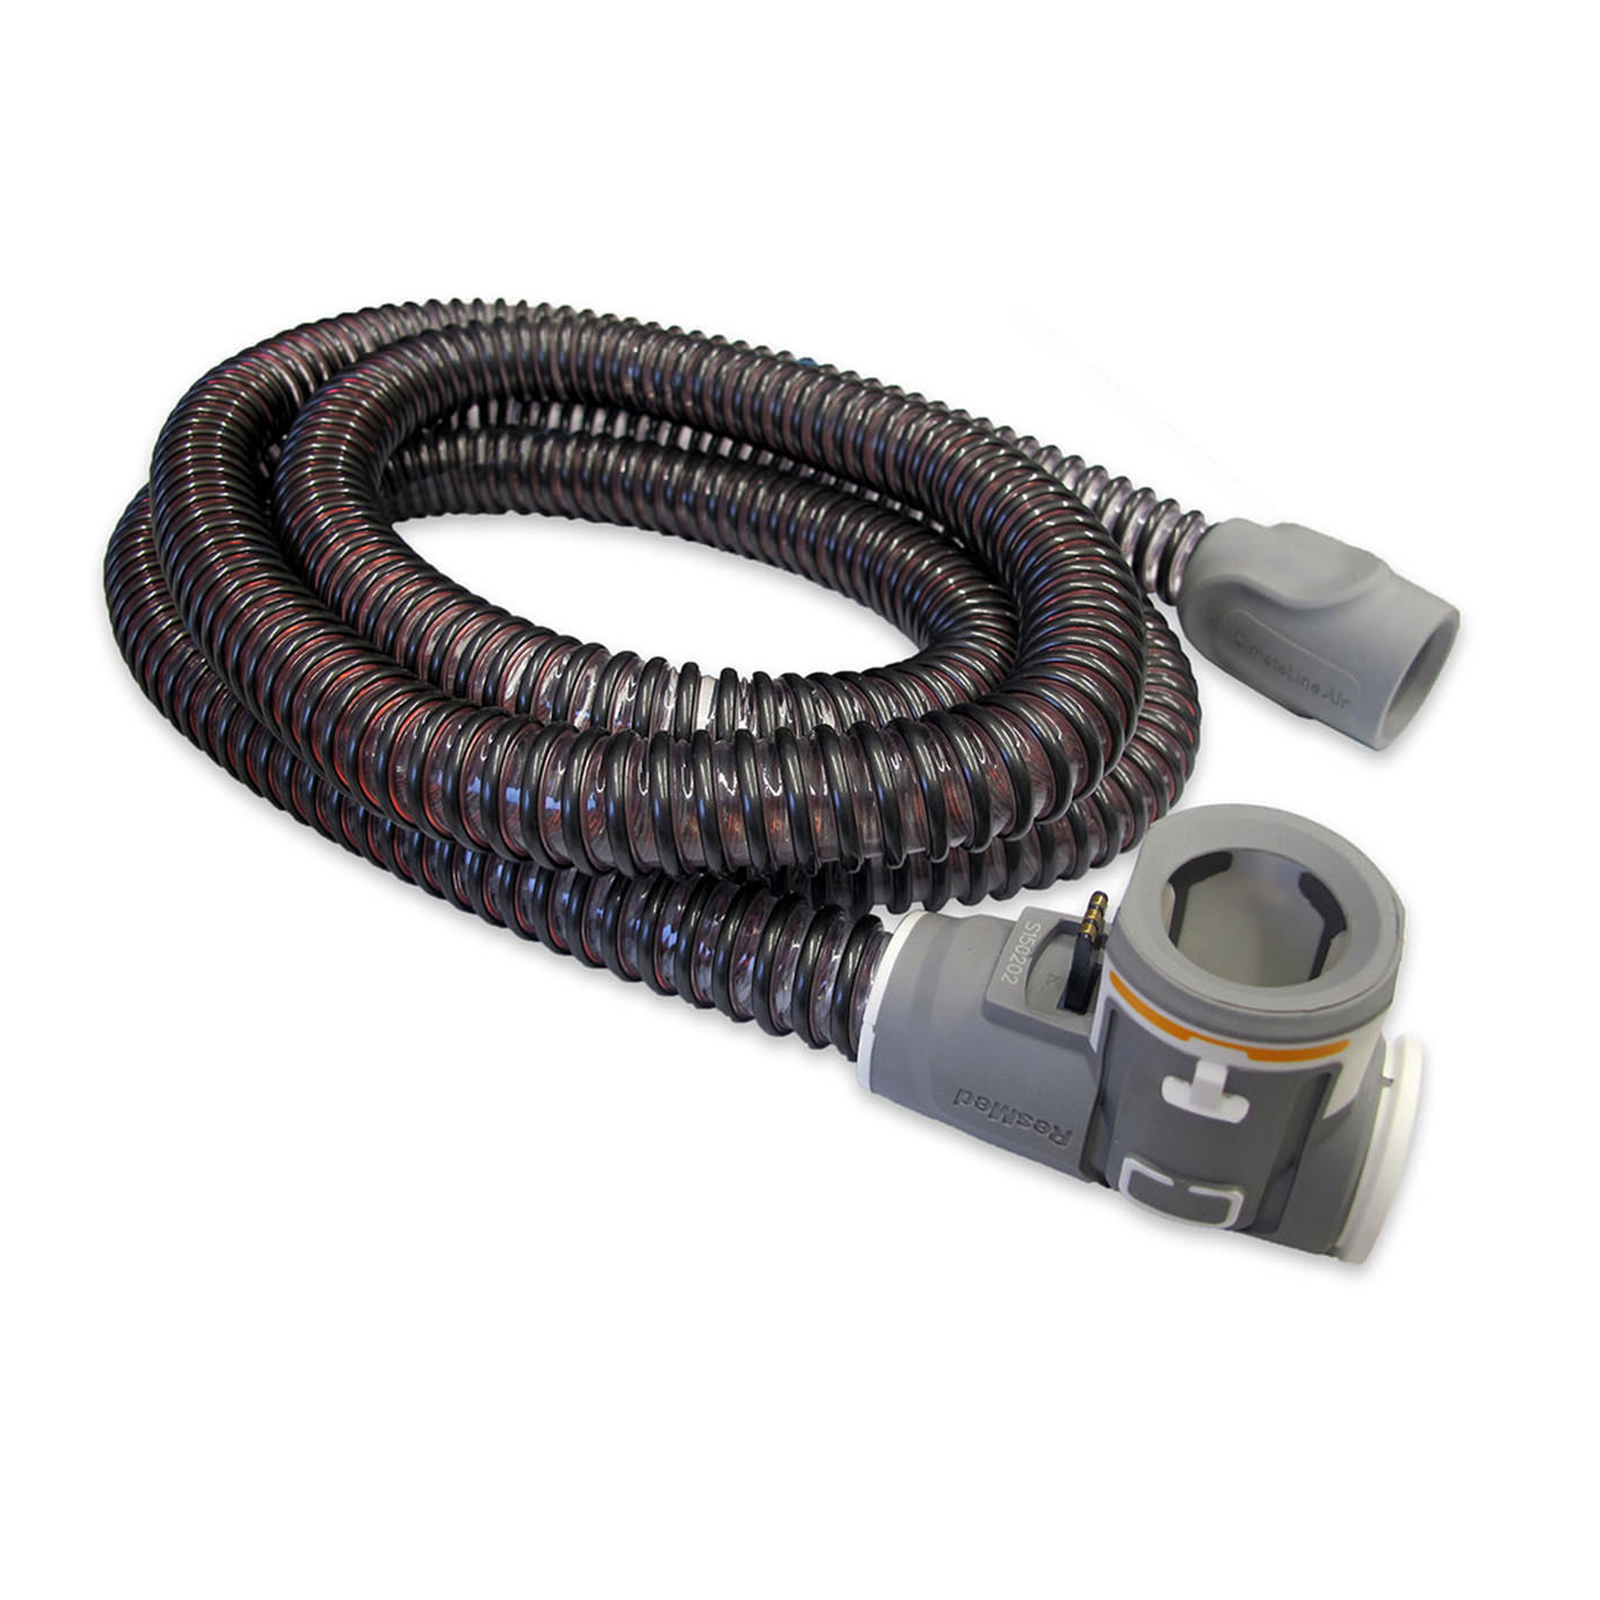 ResMed ClimateLineAir Heated Tubing for AirSense 10 | CPAP Club Online How To Clean Resmed Airsense 10 Tubing